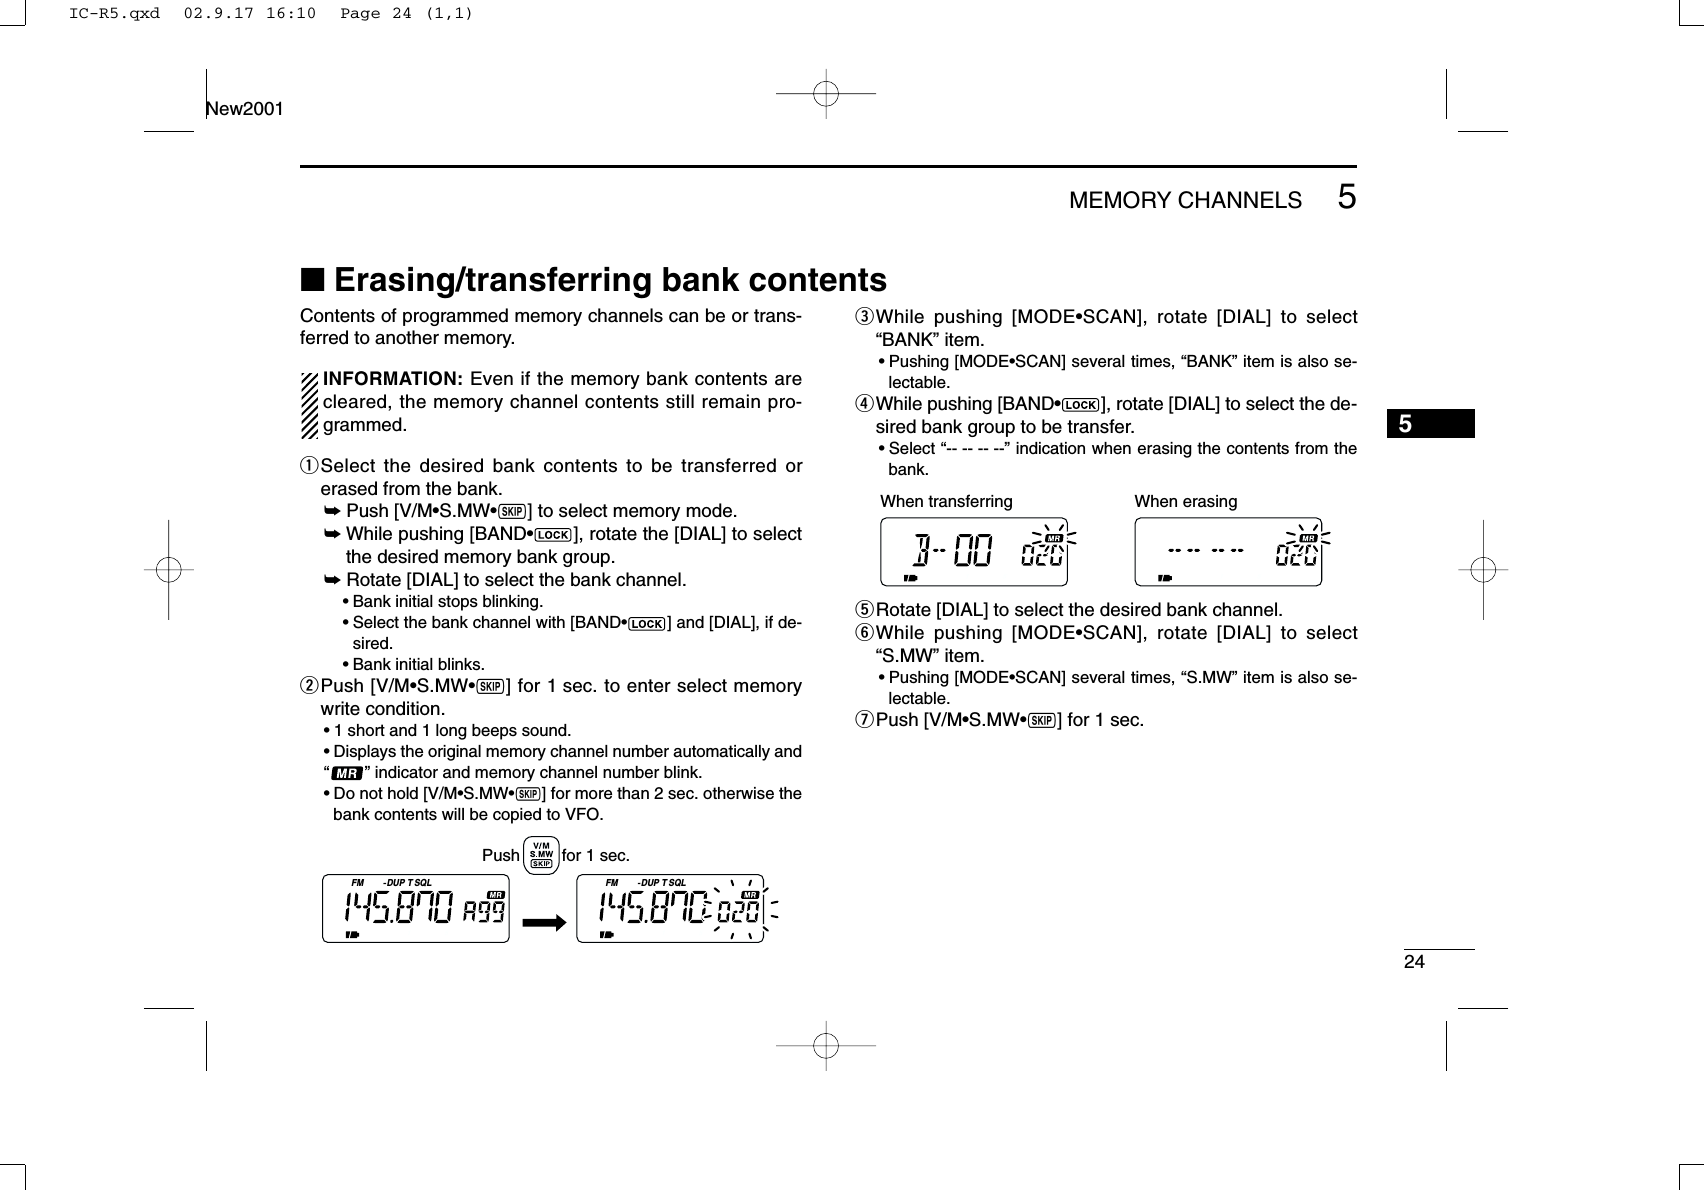 245MEMORY CHANNELSNew20015■Erasing/transferring bank contentsContents of programmed memory channels can be or trans-ferred to another memory.INFORMATION: Even if the memory bank contents arecleared, the memory channel contents still remain pro-grammed.qSelect the desired bank contents to be transferred orerased from the bank.➥Push [V/M•S.MW•~] to select memory mode.➥While pushing [BAND•], rotate the [DIAL] to selectthe desired memory bank group.➥Rotate [DIAL] to select the bank channel.•Bank initial stops blinking.•Select the bank channel with [BAND•] and [DIAL], if de-sired.•Bank initial blinks.wPush [V/M•S.MW•~] for 1 sec. to enter select memorywrite condition.•1 short and 1 long beeps sound.•Displays the original memory channel number automatically and“” indicator and memory channel number blink.•Do not hold [V/M•S.MW•~] for more than 2 sec. otherwise thebank contents will be copied to VFO.eWhile pushing [MODE•SCAN], rotate [DIAL] to select“BANK” item.•Pushing [MODE•SCAN] several times, “BANK” item is also se-lectable.rWhile pushing [BAND•], rotate [DIAL] to select the de-sired bank group to be transfer.•Select “-- -- -- --” indication when erasing the contents from thebank.tRotate [DIAL] to select the desired bank channel.yWhile pushing [MODE•SCAN], rotate [DIAL] to select“S.MW” item.•Pushing [MODE•SCAN] several times, “S.MW” item is also se-lectable.uPush [V/M•S.MW•~] for 1 sec.When transferring When erasing FM DUP SQLTFM DUP SQLTPush         for 1 sec.IC-R5.qxd  02.9.17 16:10  Page 24 (1,1)